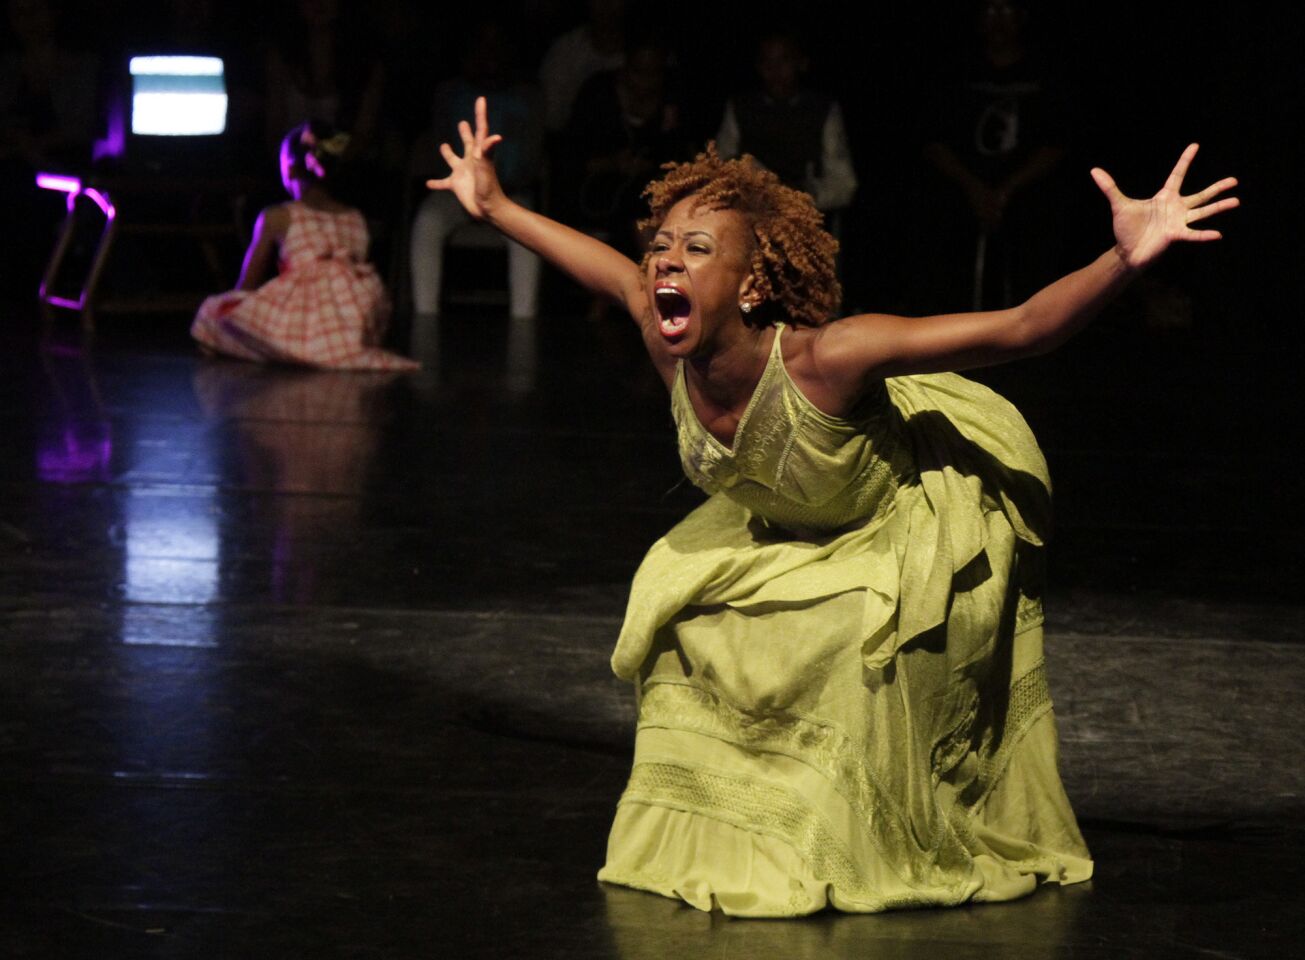 Arts and culture in pictures by The Times | L.A. Dance Festival